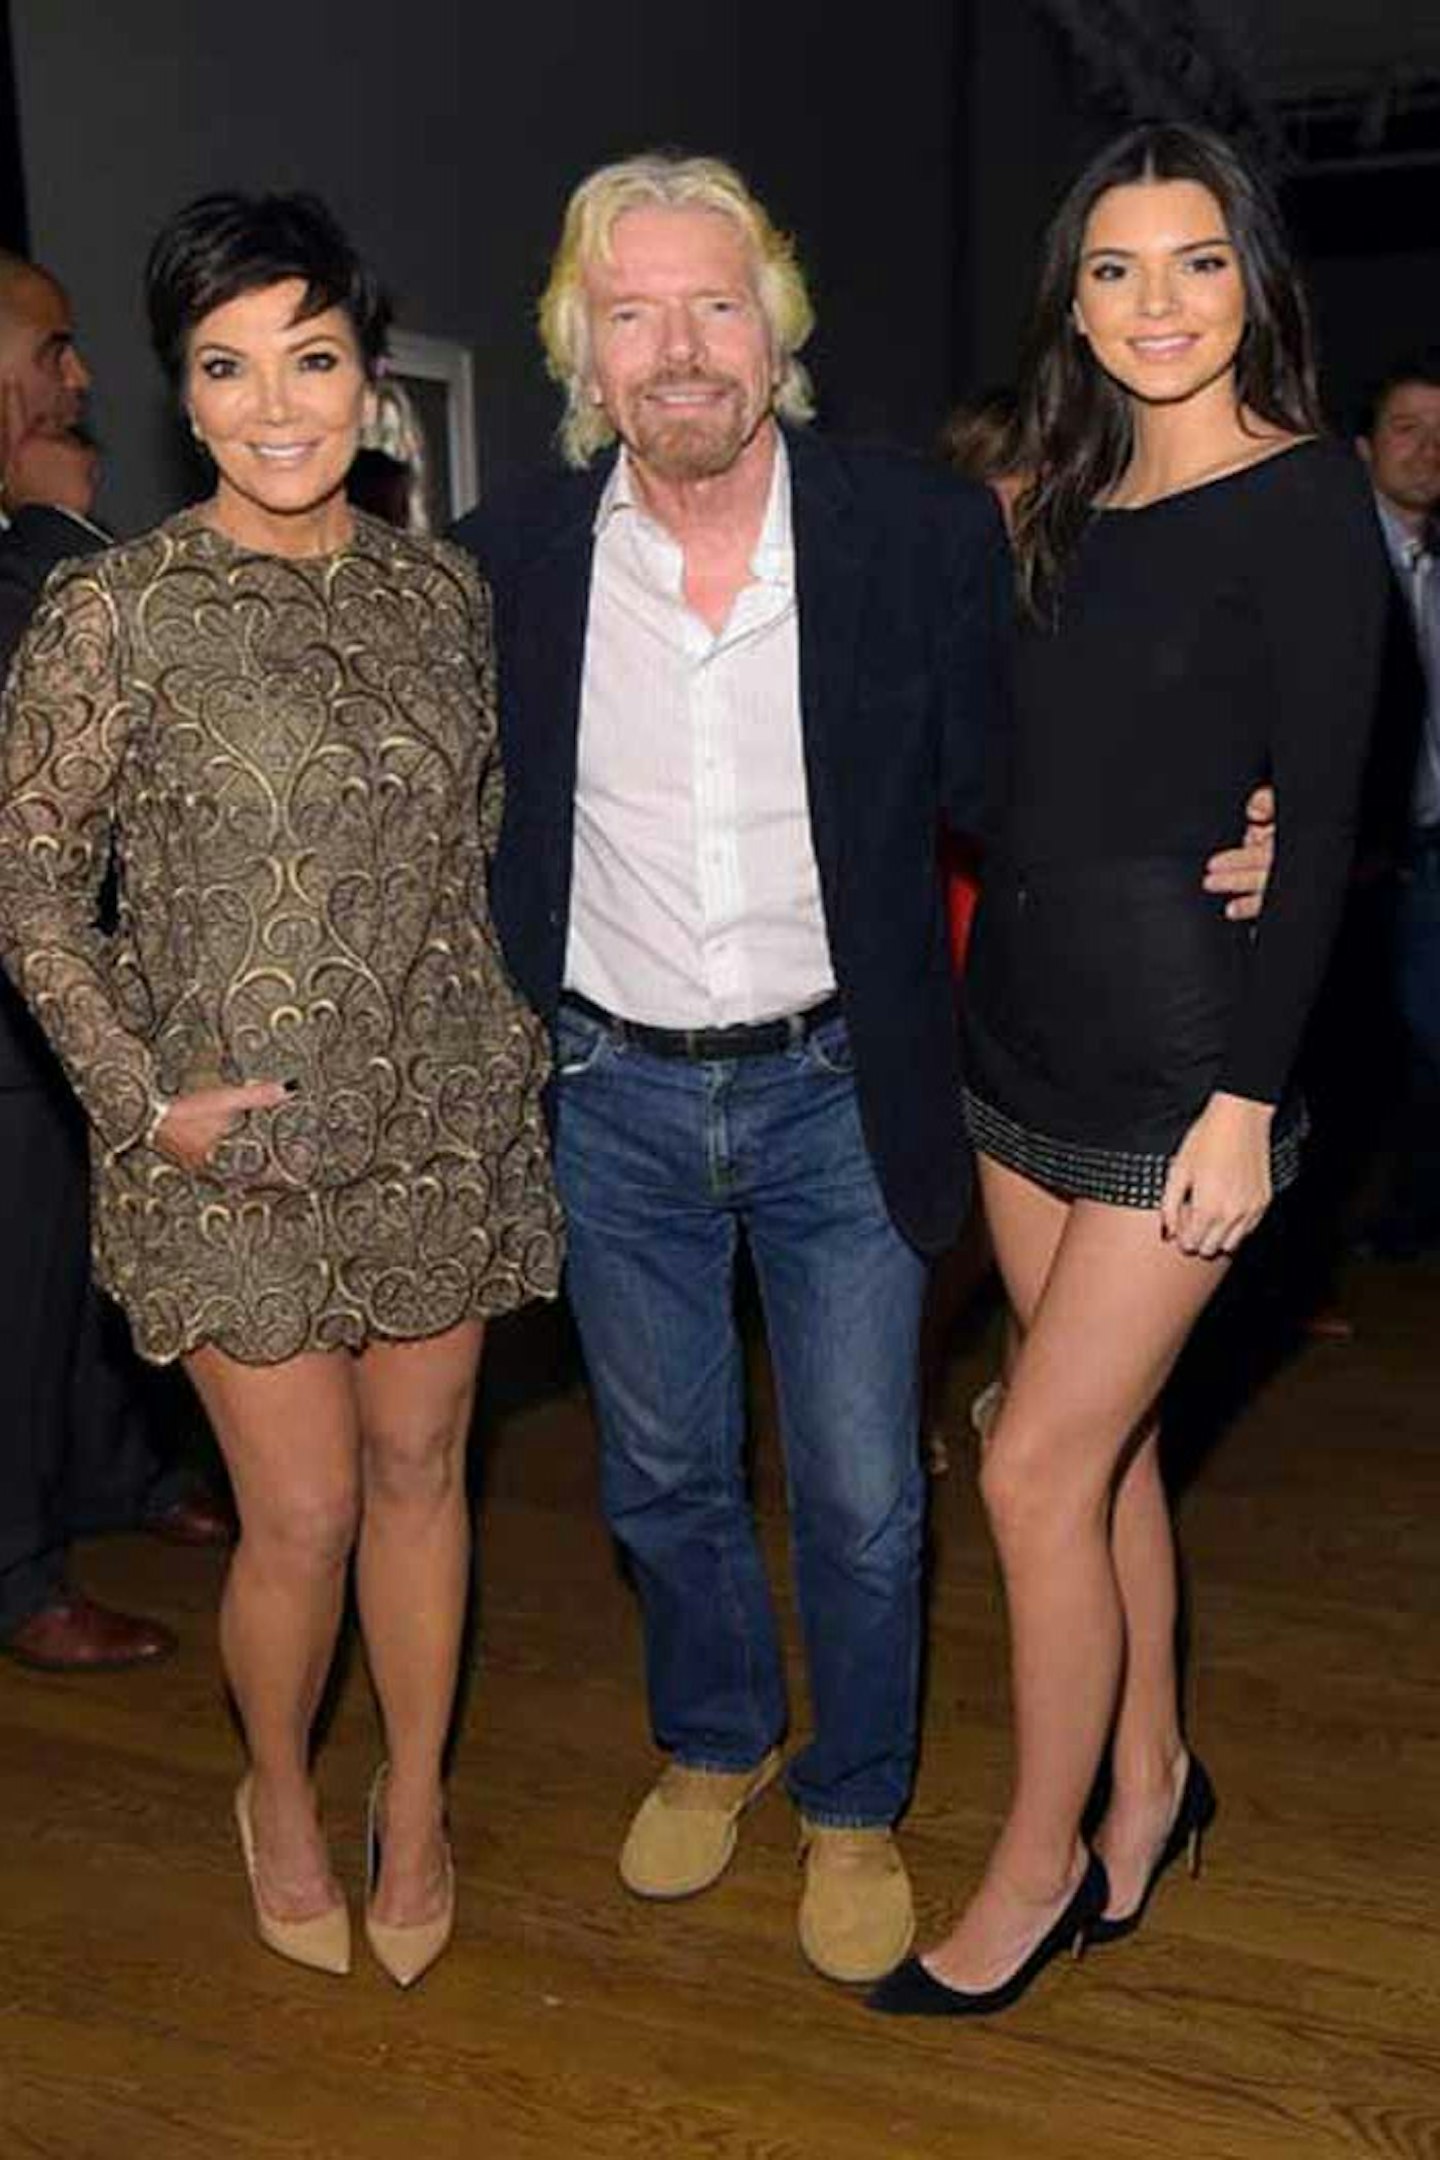 Kris Jenner, Sir Richard Branson and Kendall Jenner at the Victoria's Secret Angel book launch